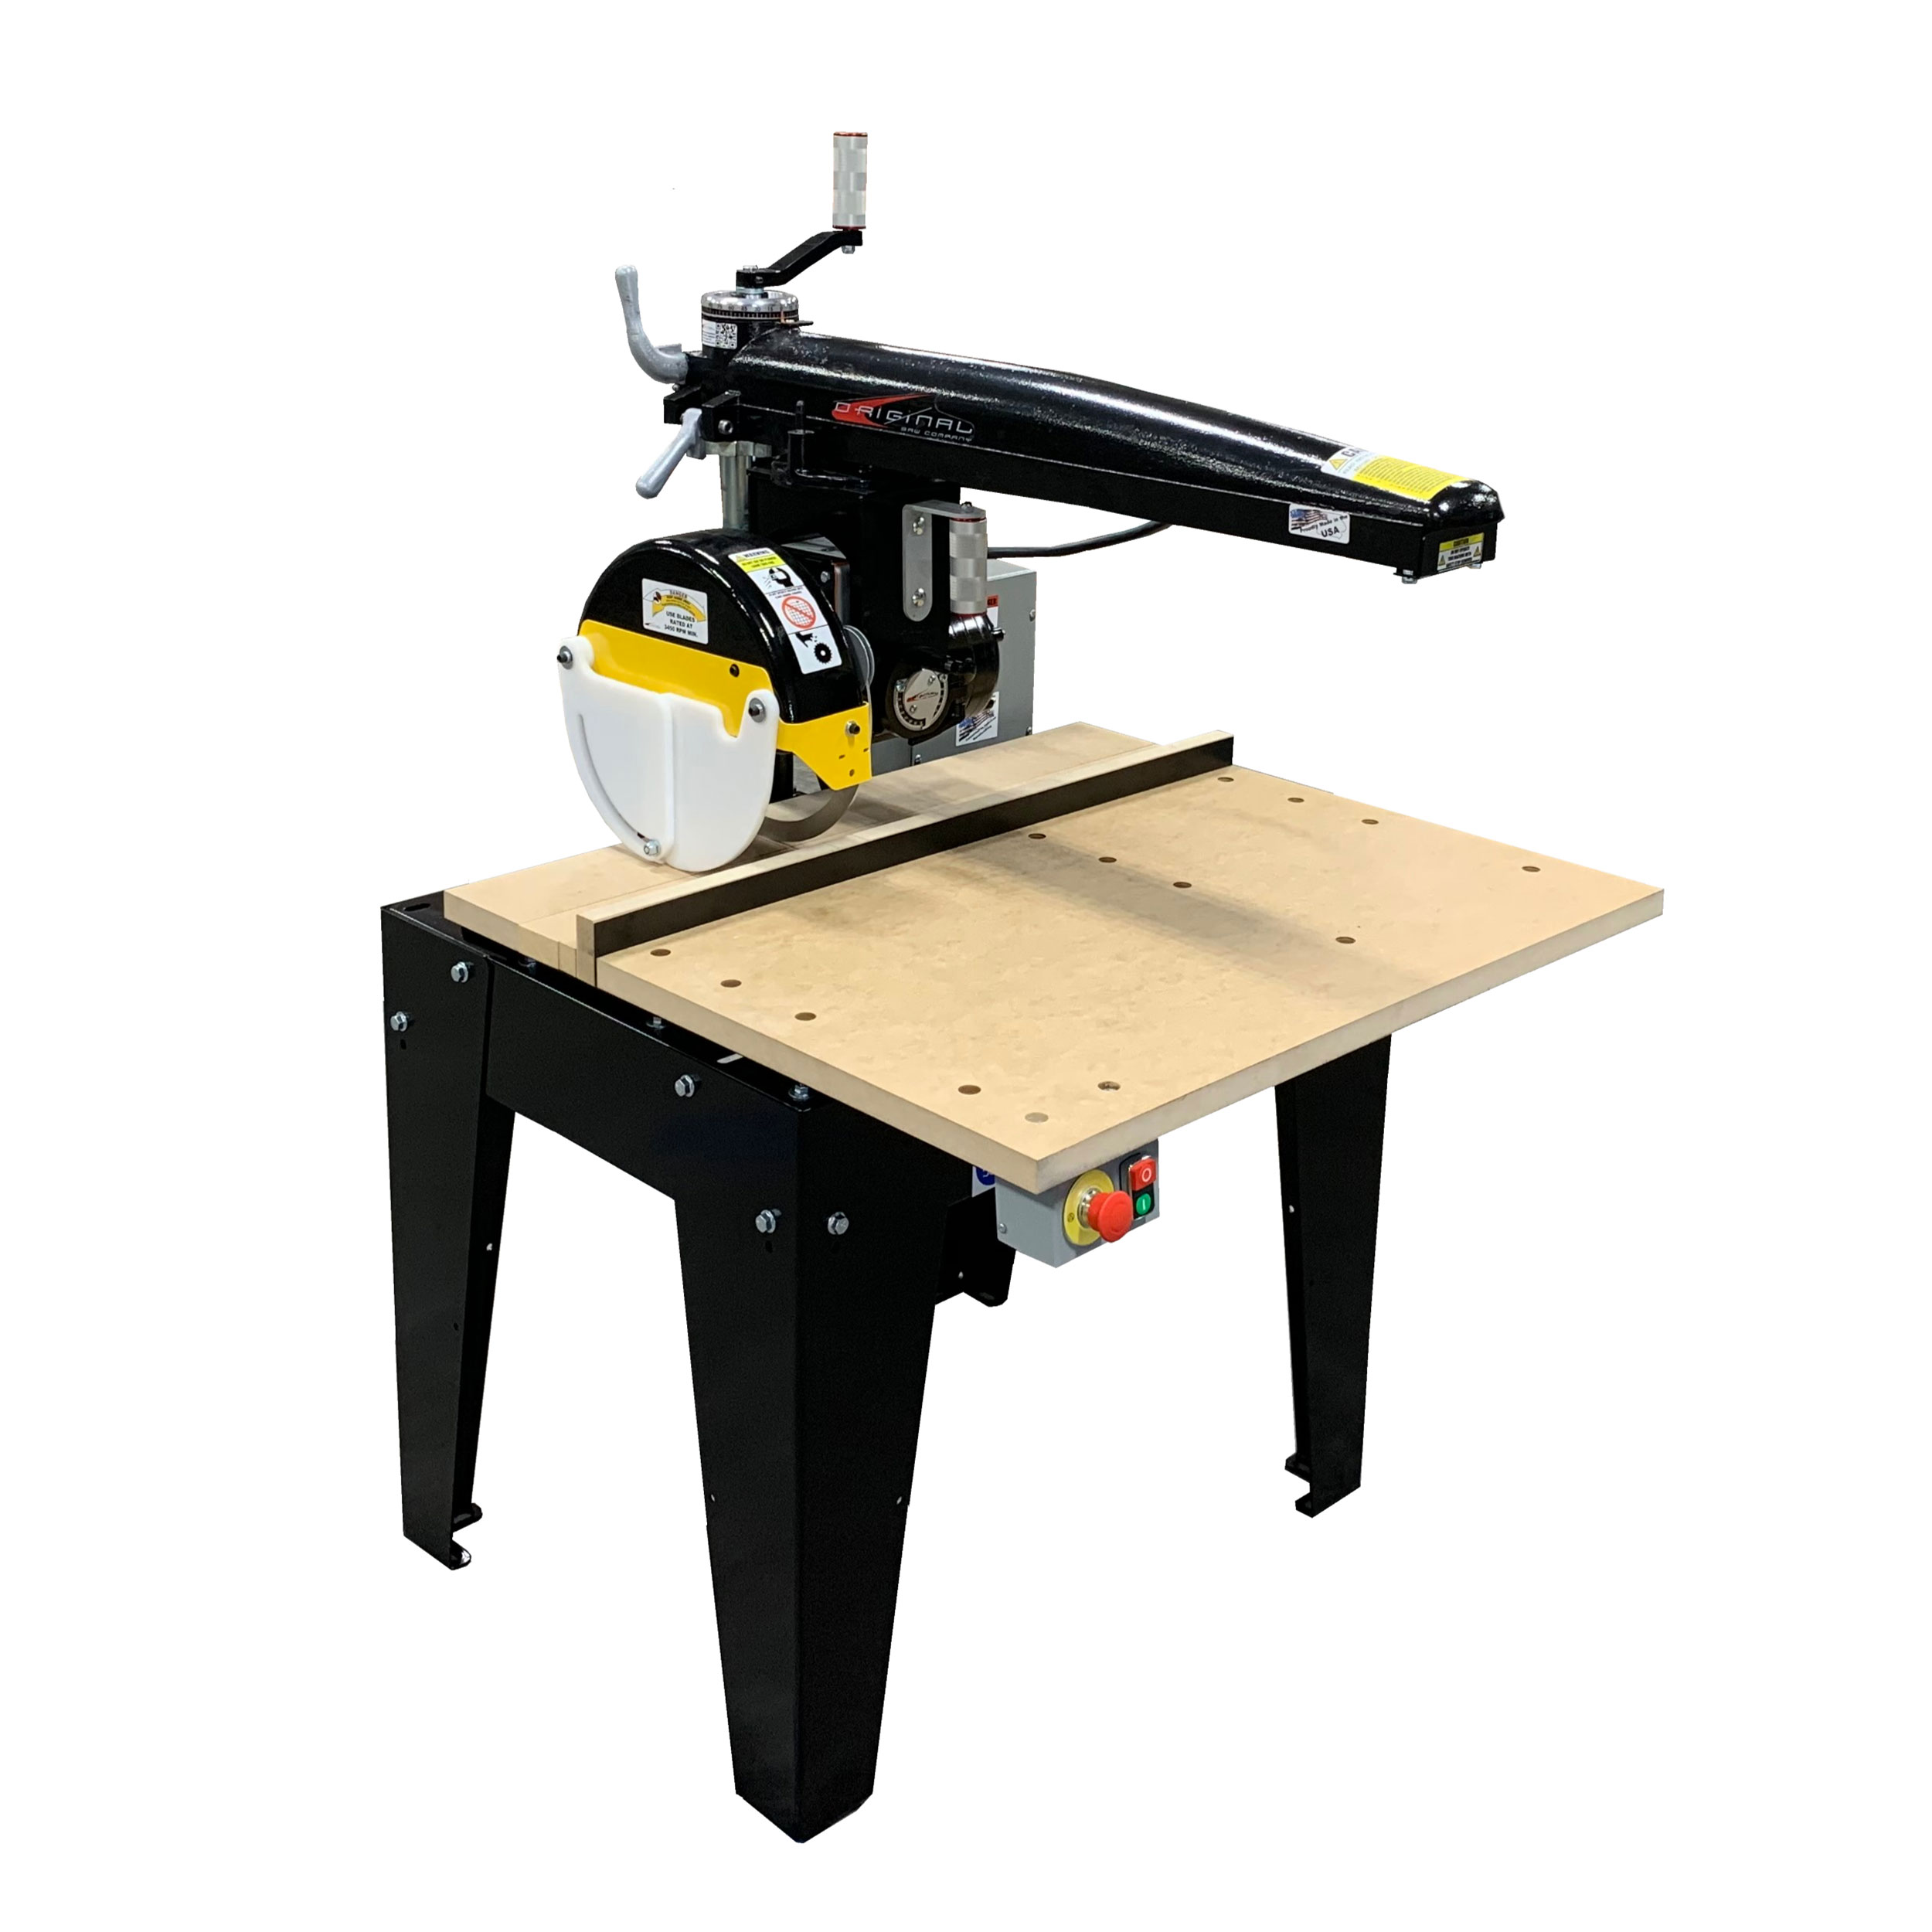 Radial Arm Saw With 12" Blade And 24" Crosscut, 3hp 3 Phase 208/230v